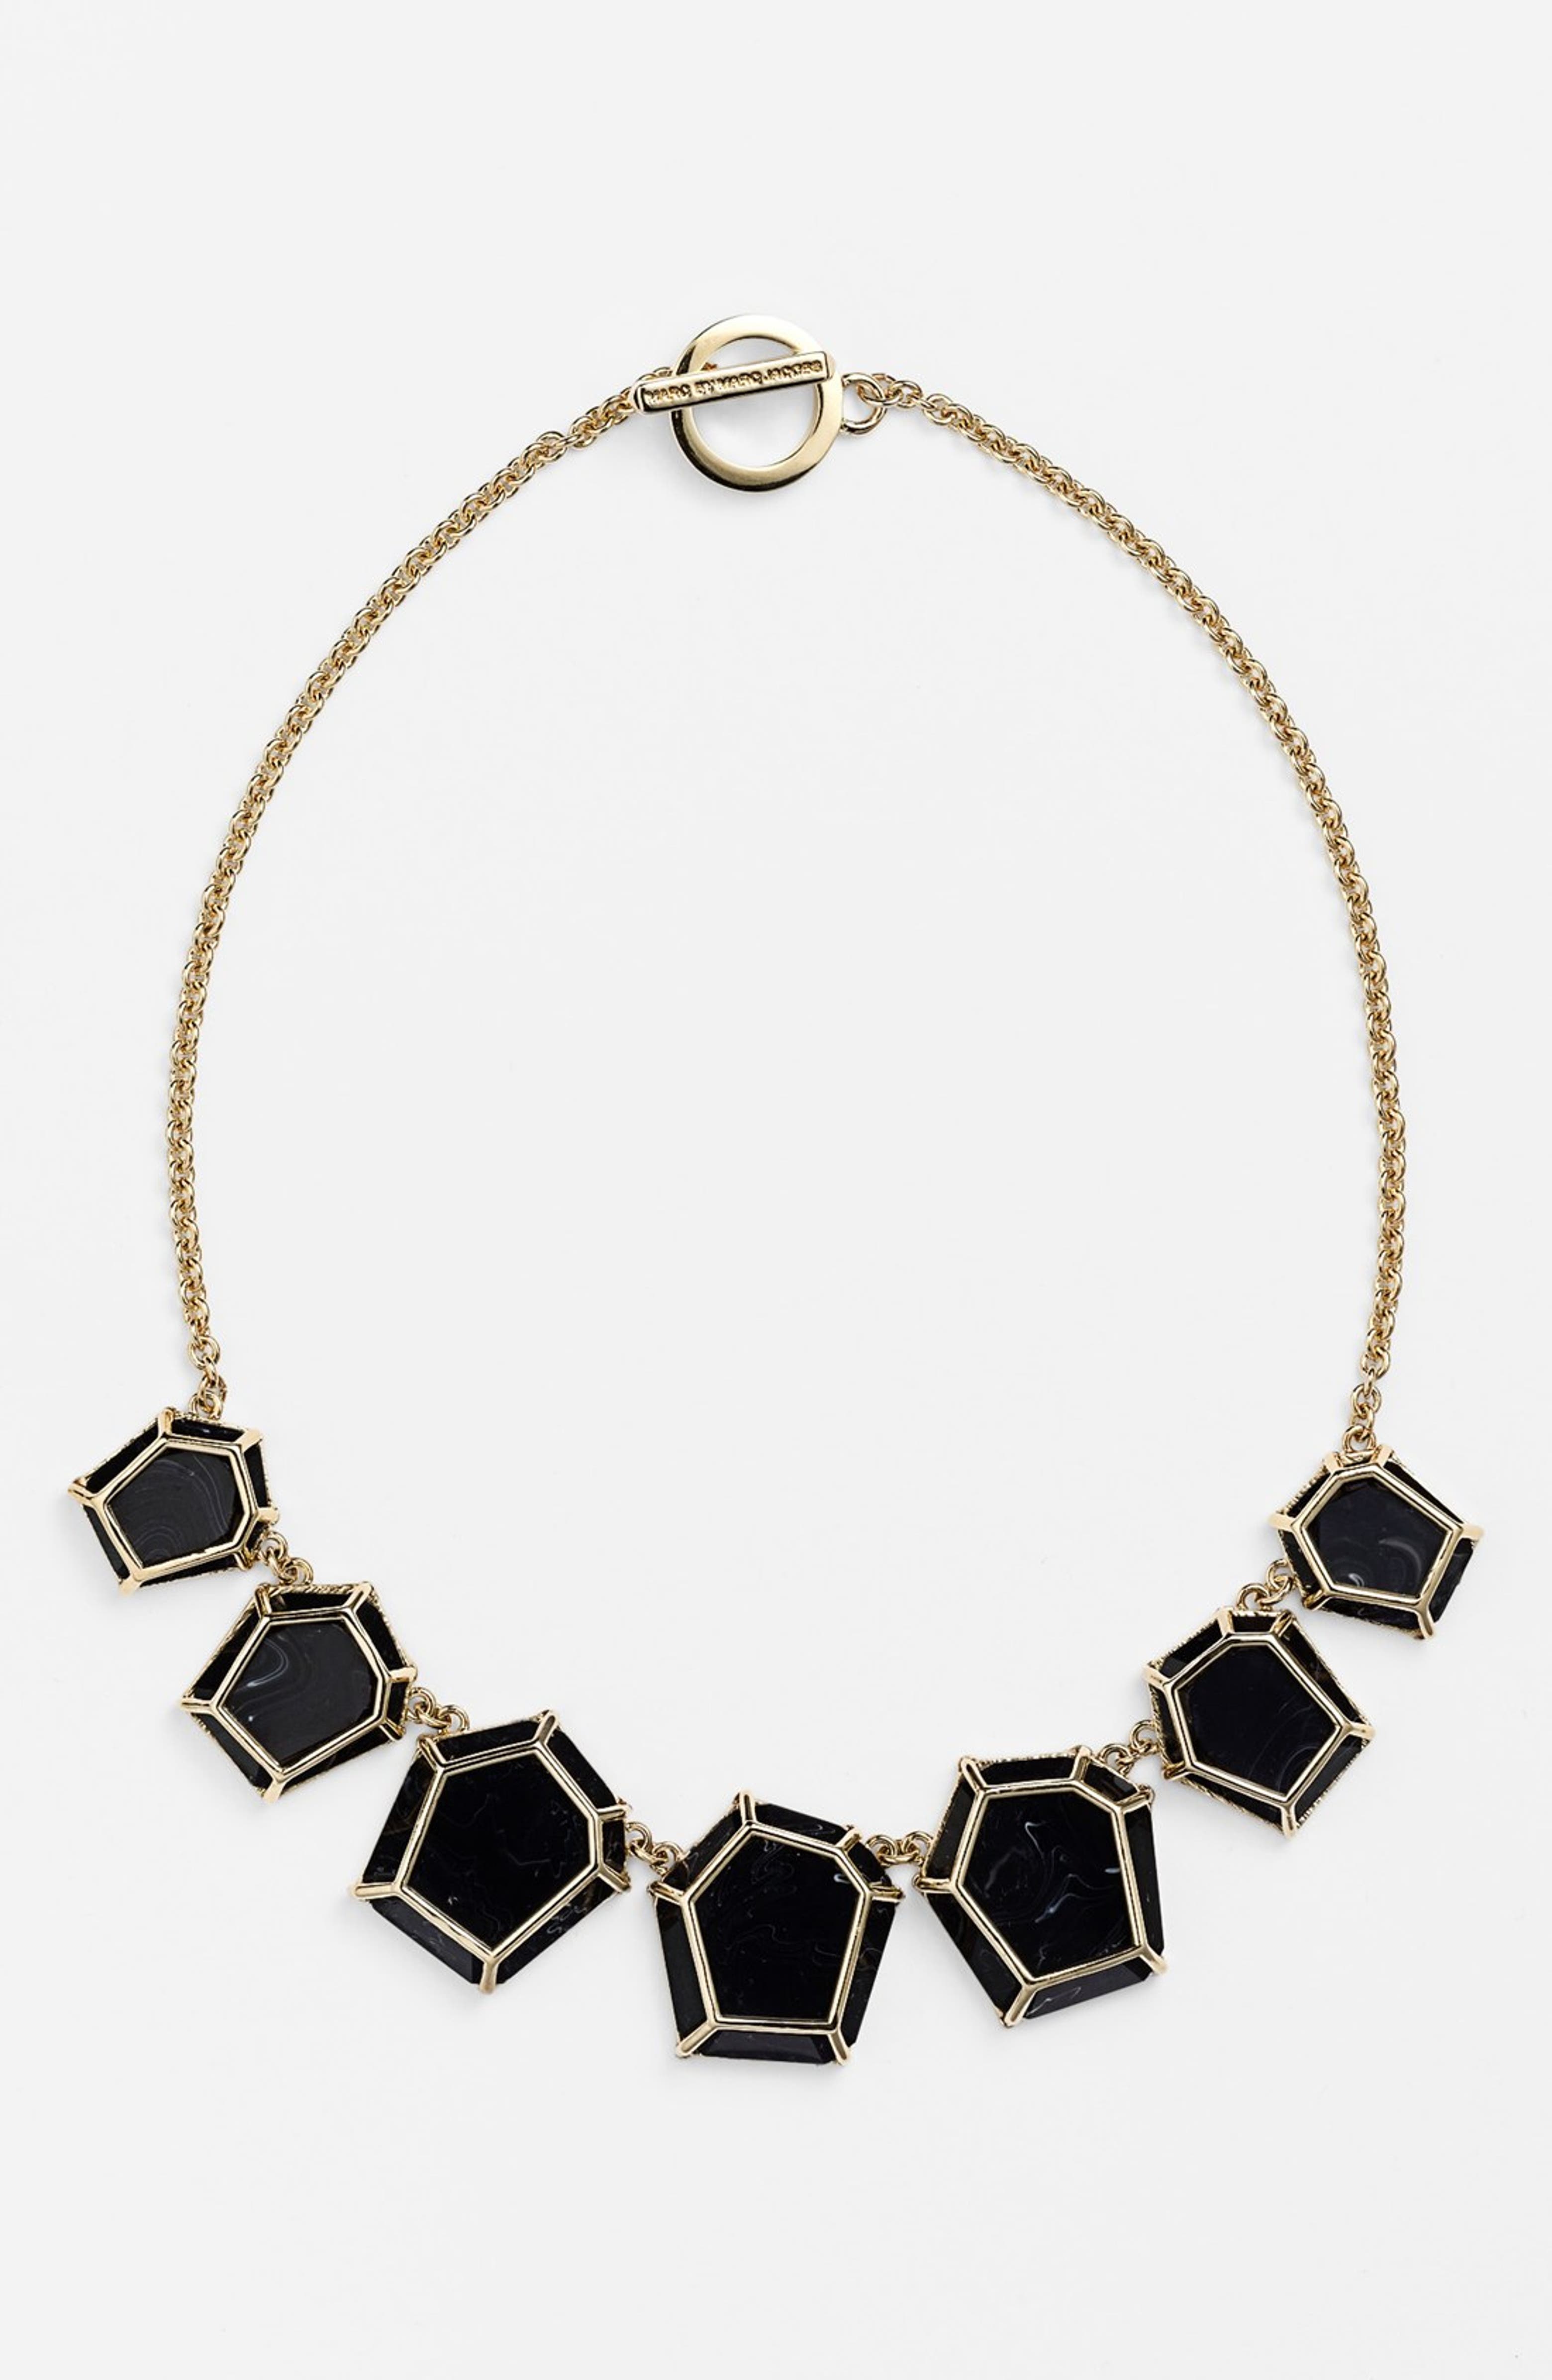 MARC BY MARC JACOBS Bib Necklace | Nordstrom